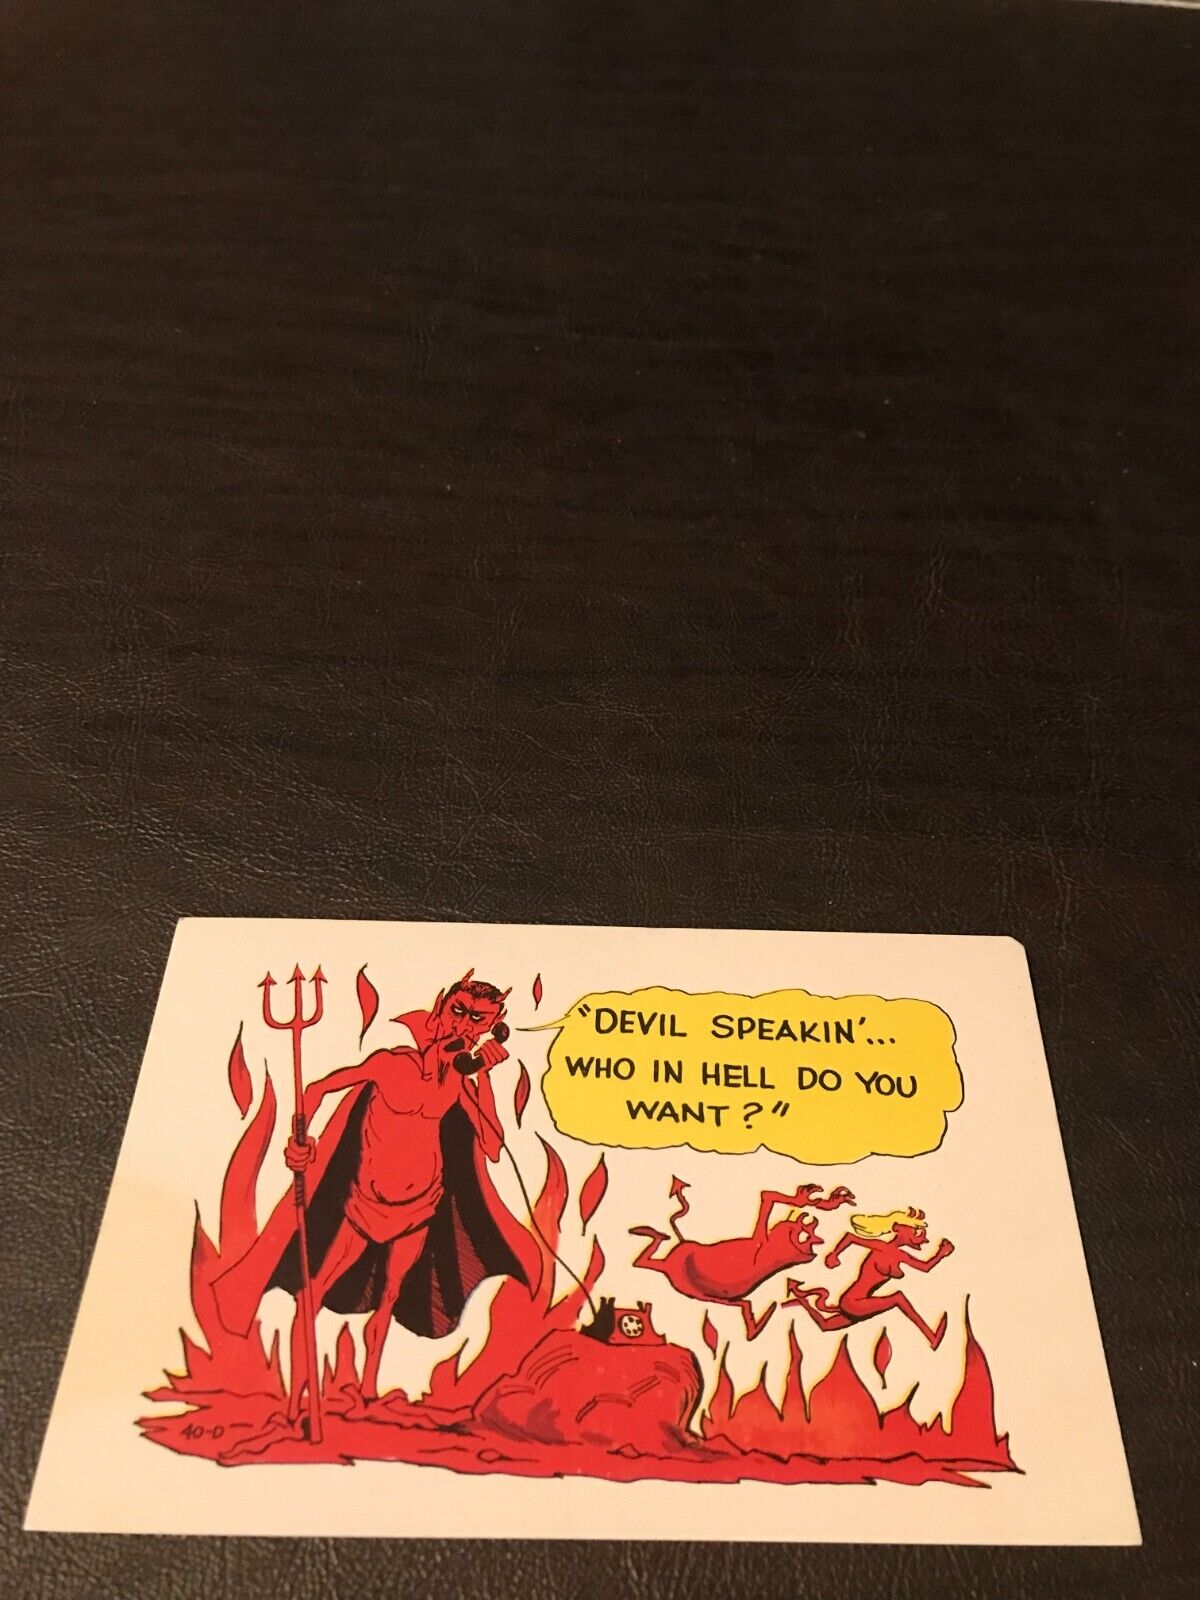 HUMOR - DEVIL SPEAKIN ... WHO IN HELL DO YOU WANT - UNPOSTED POSTCARD